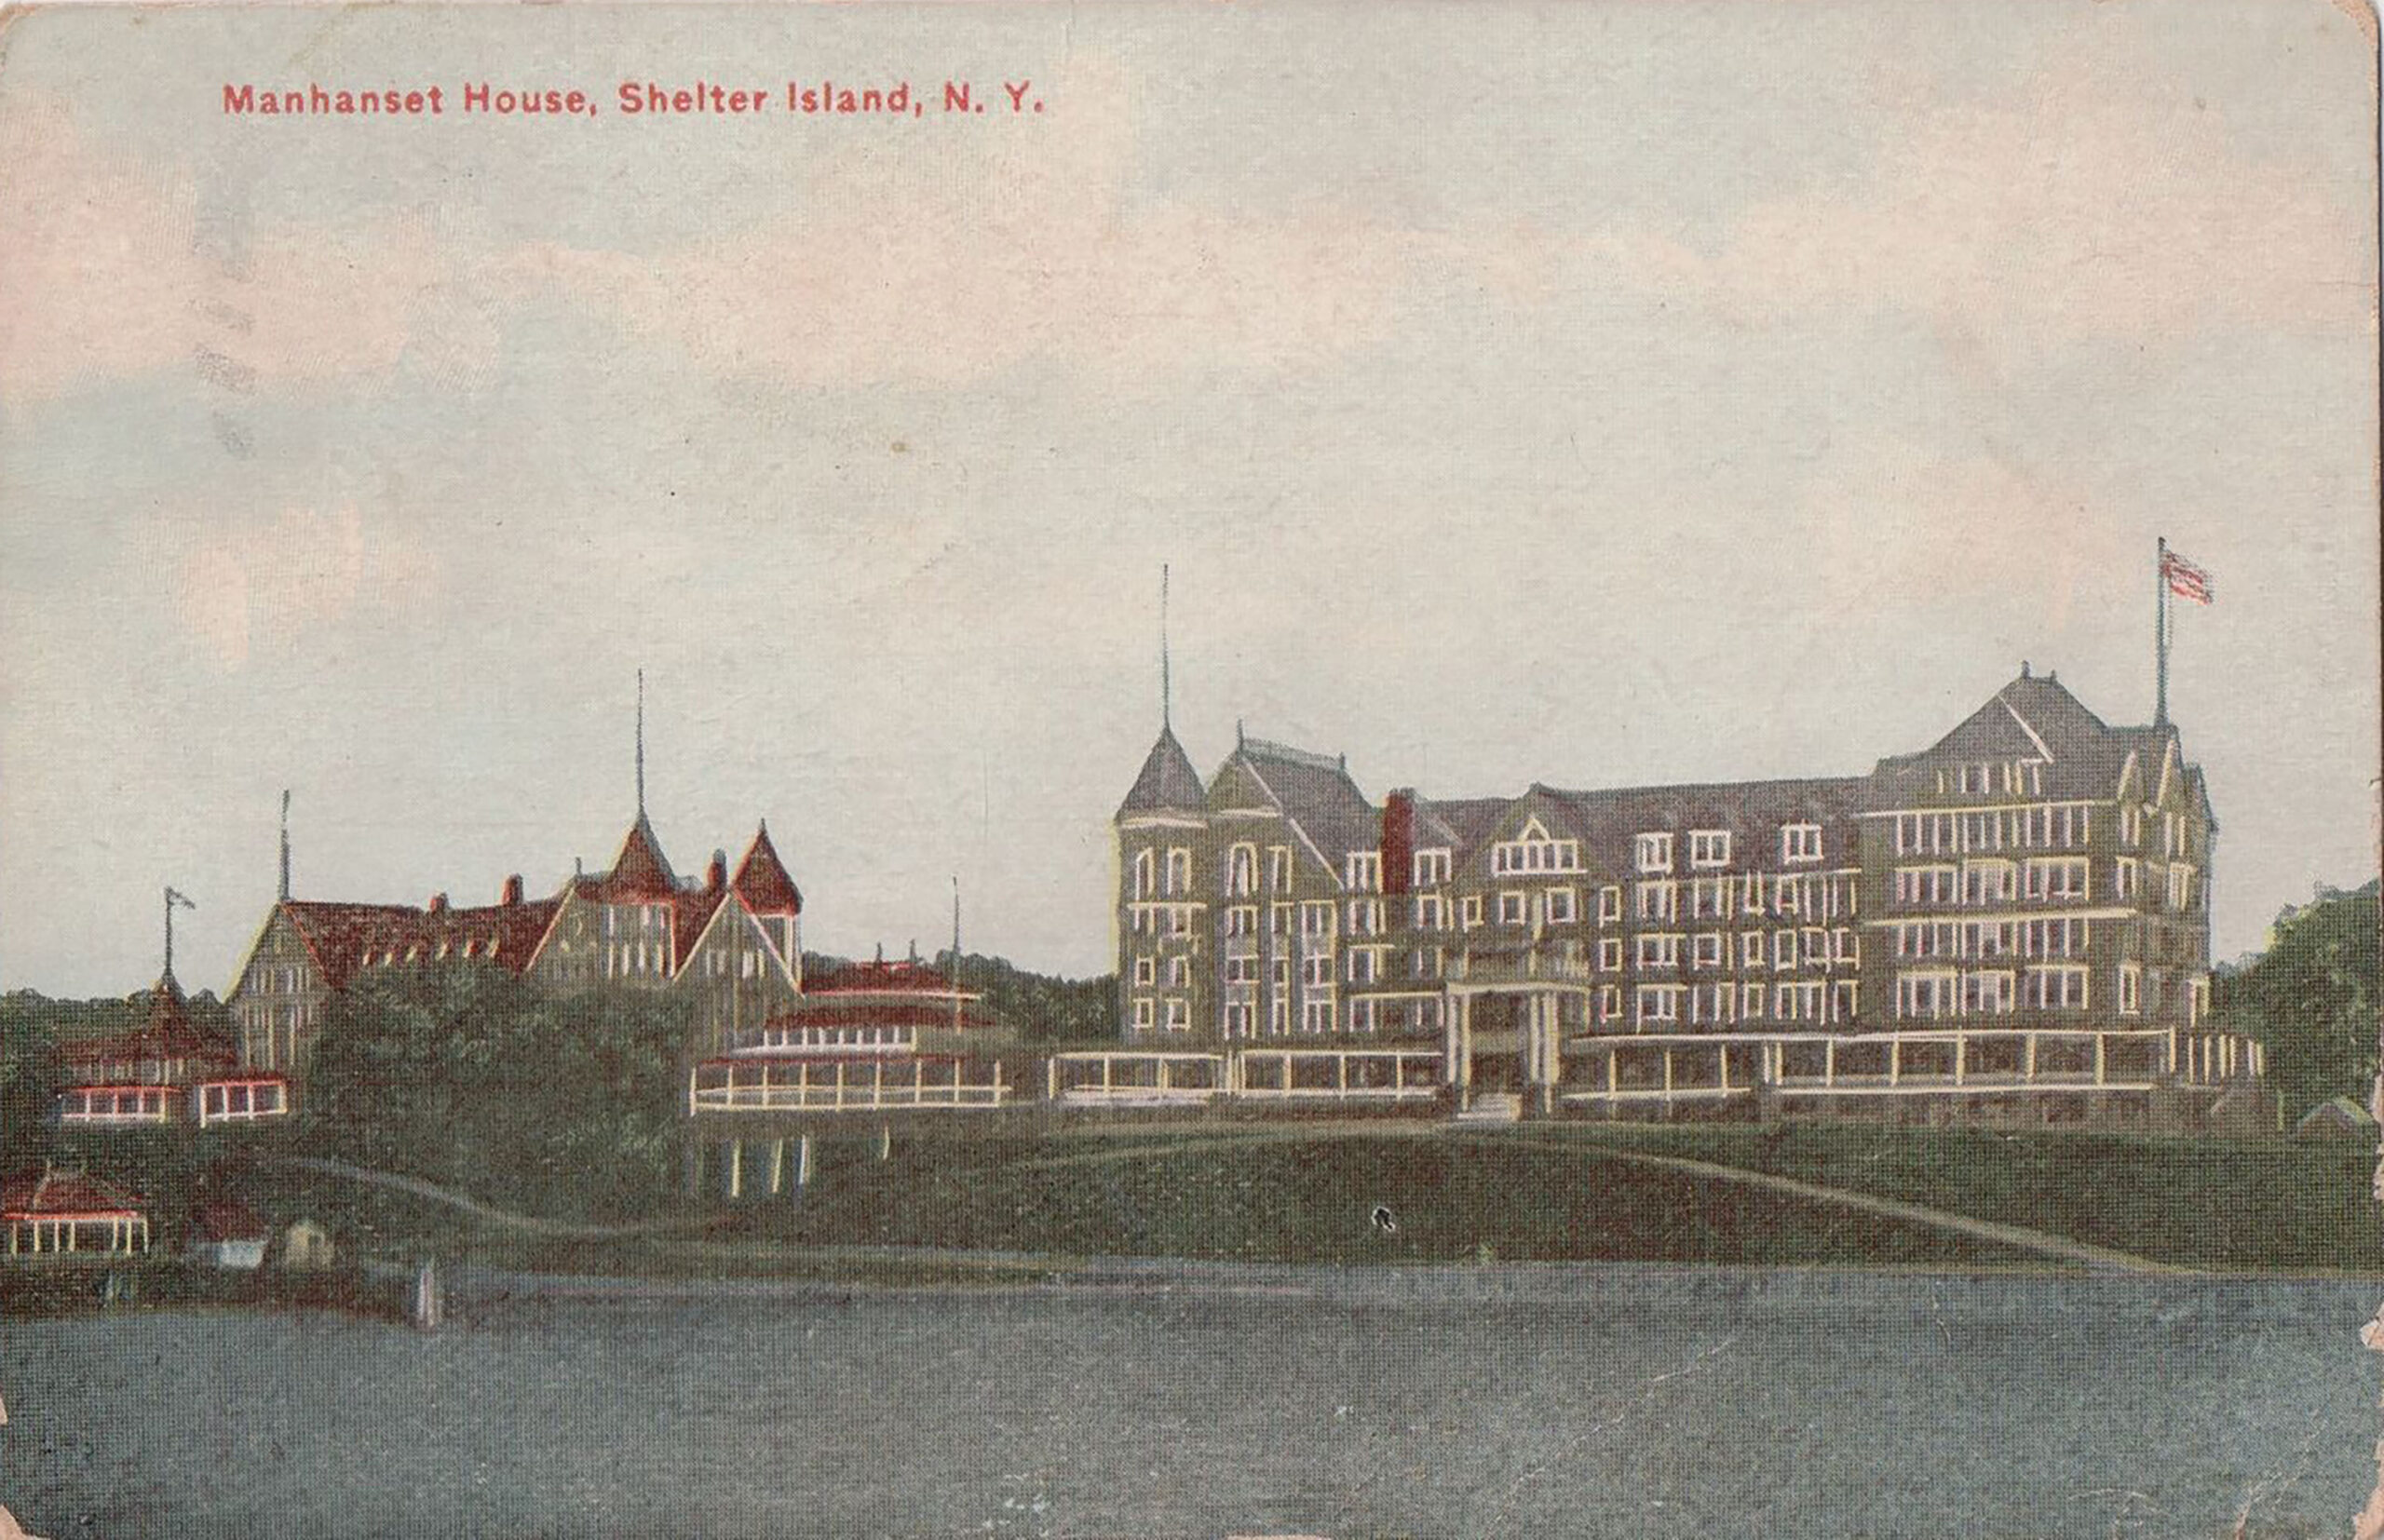 An old postcard depicting the Manhanset House on Shelter Island.